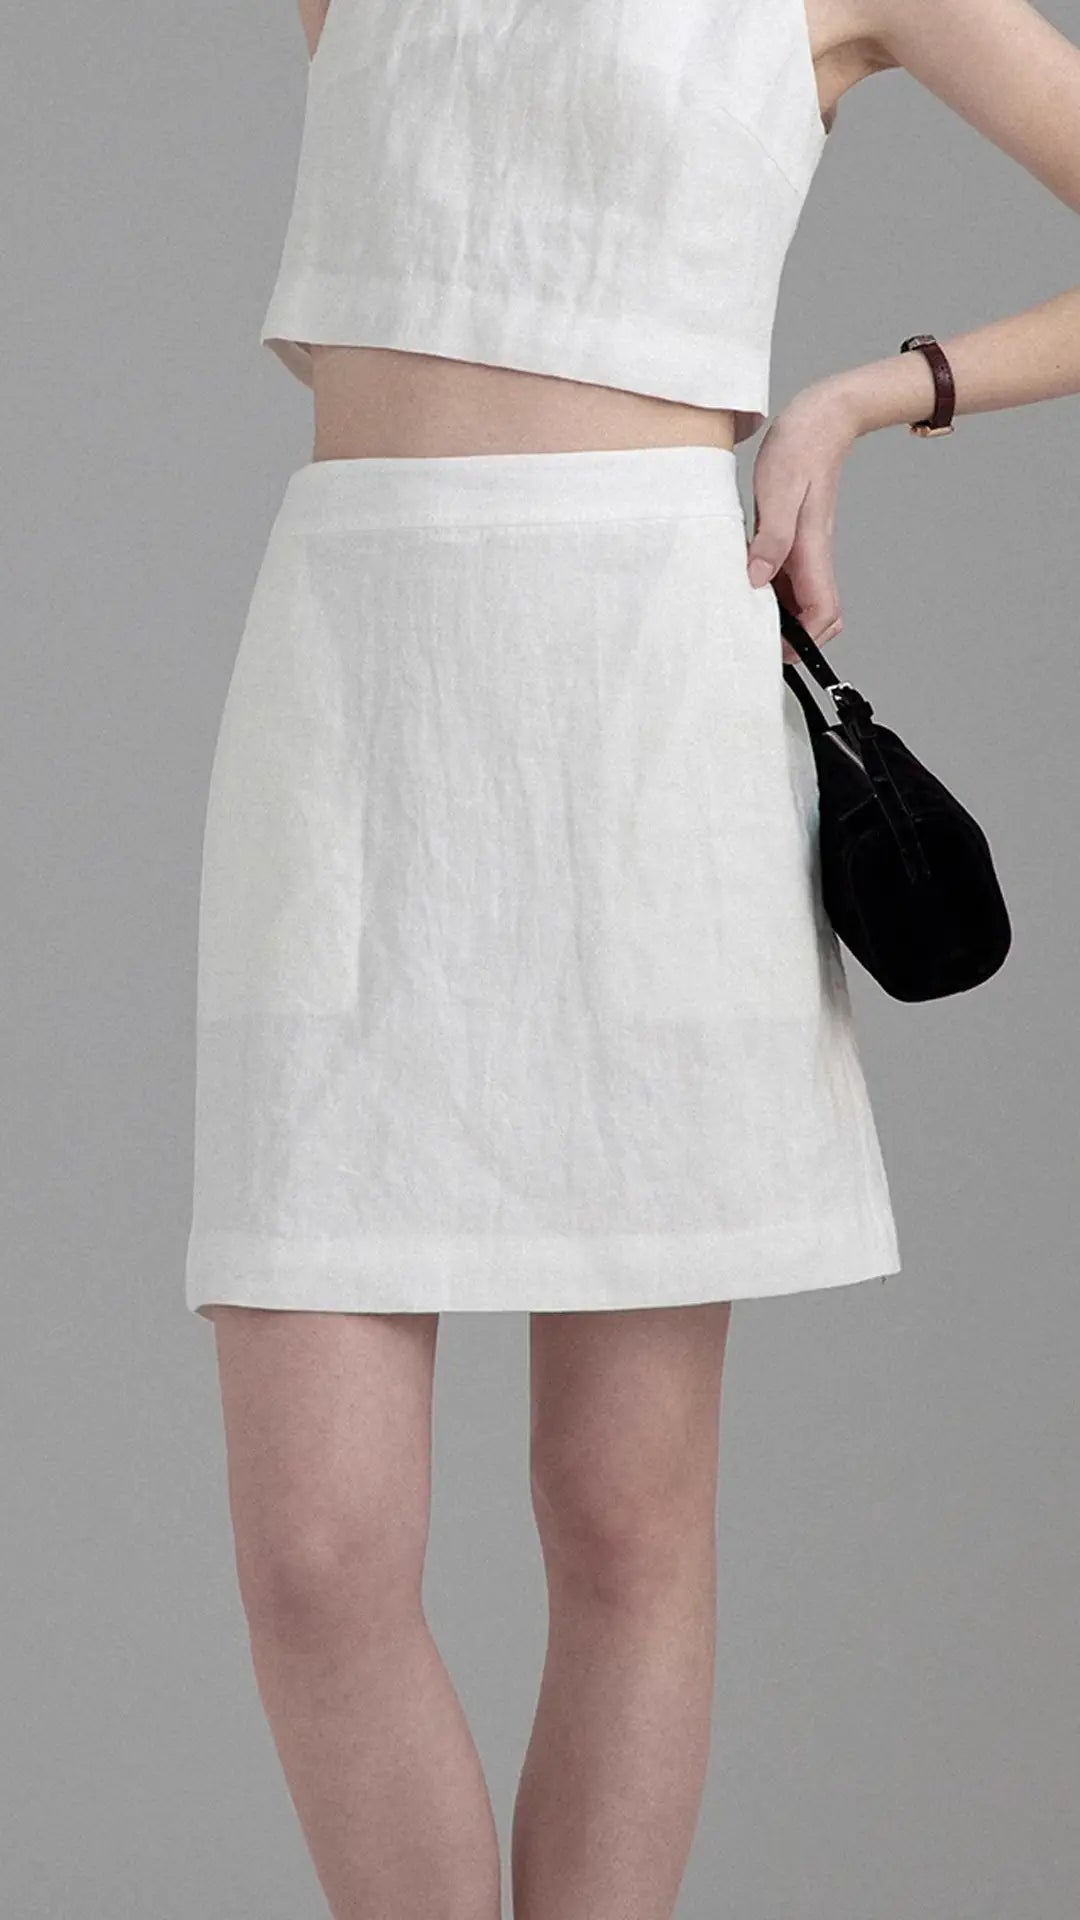 Linen Simple Strappy Tank Top and Skirt